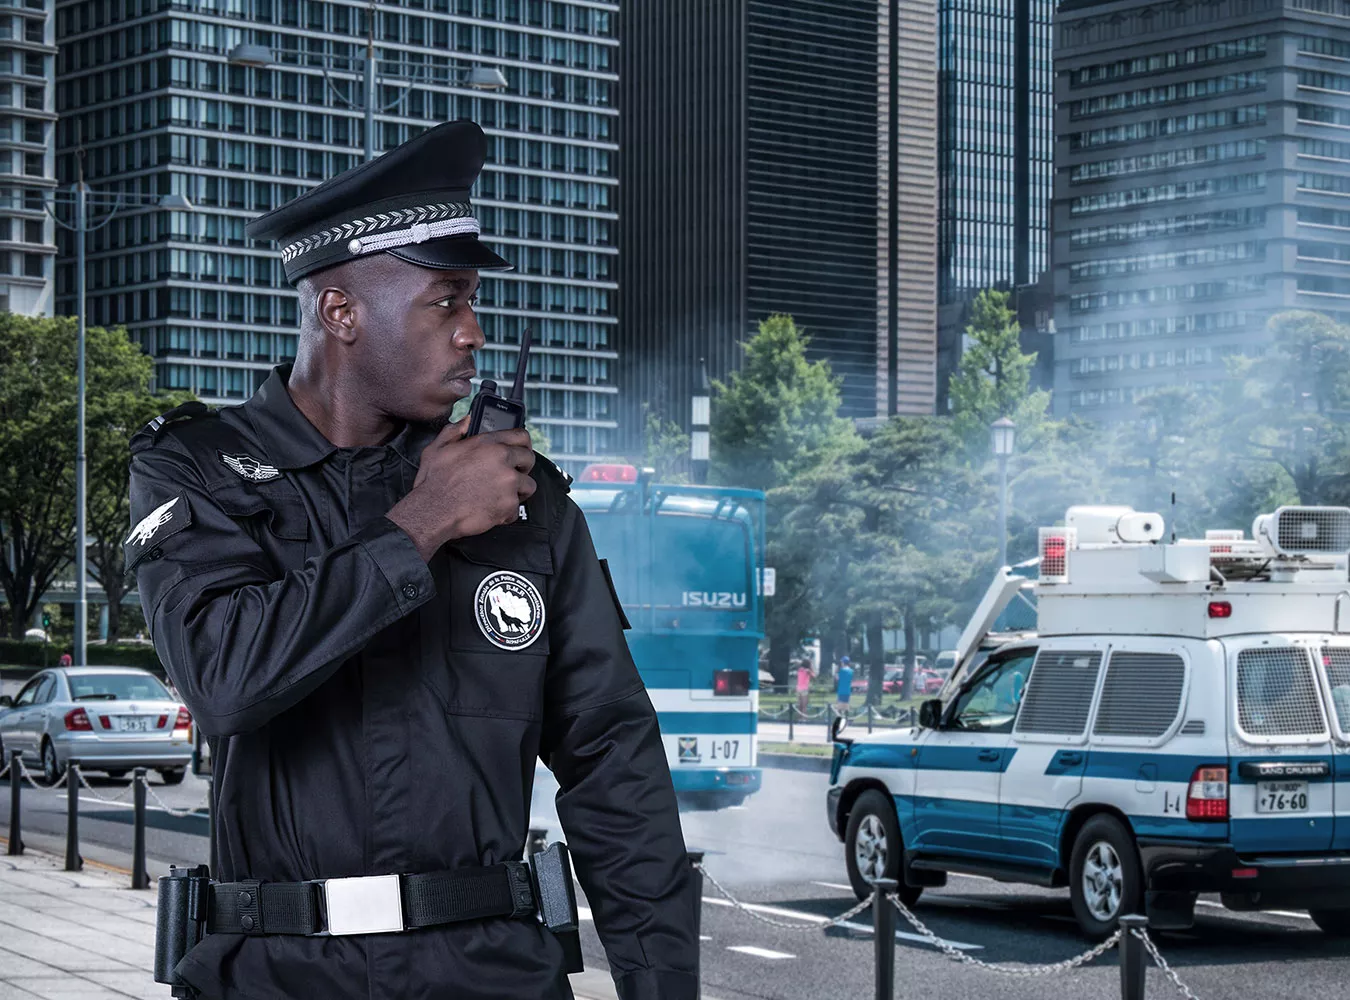 Why Are Most Two Way Radios Black?